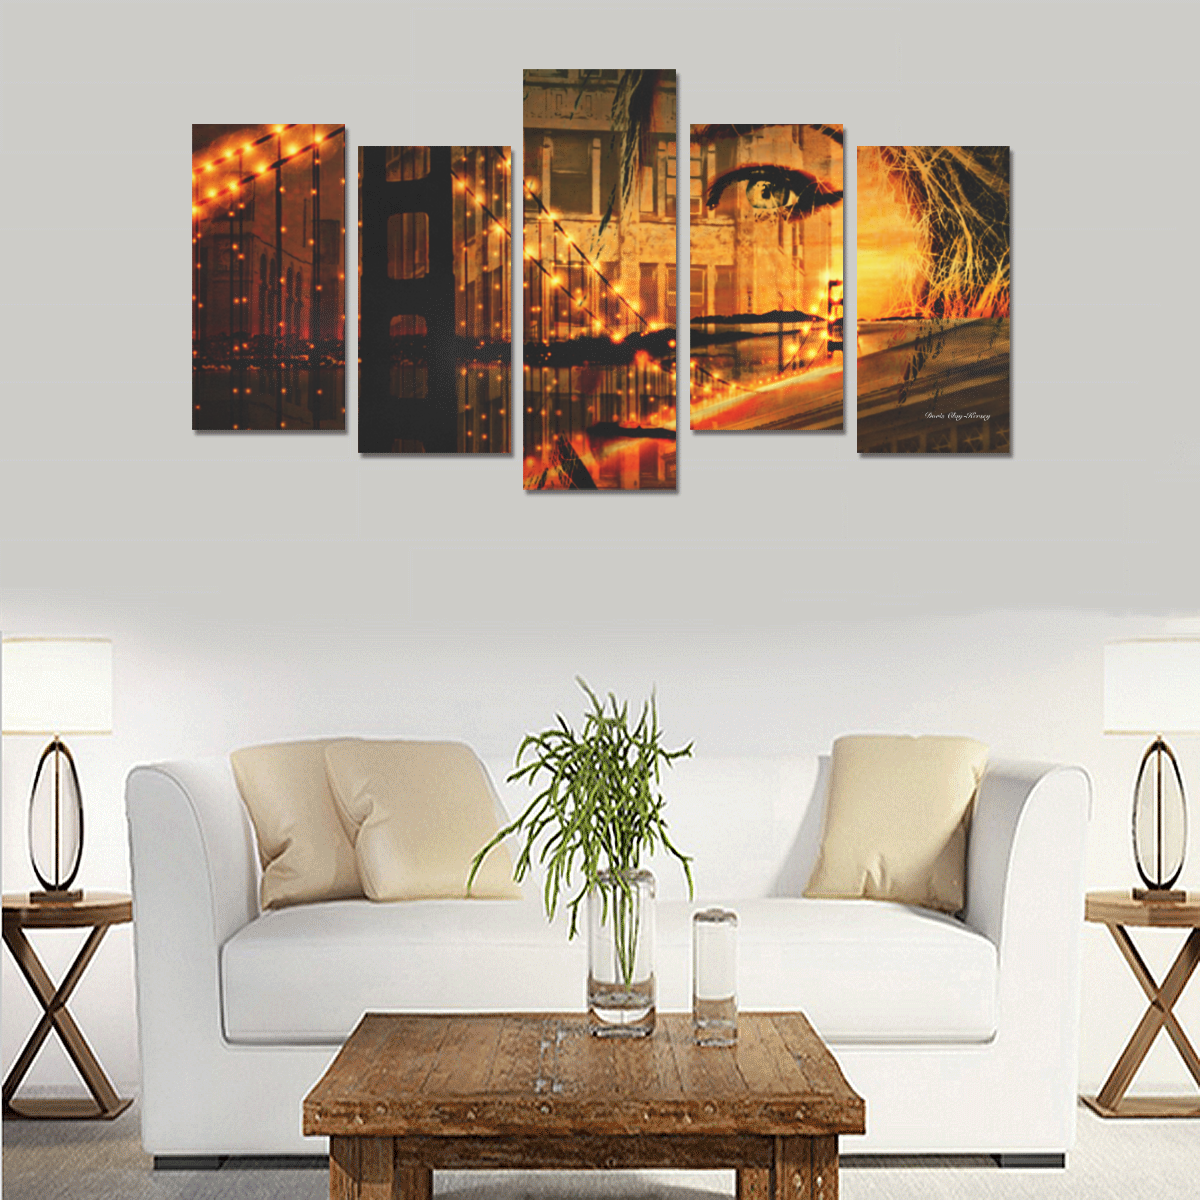 Checking Out the Scenary Design By Me by Doris Clay-Kersey Canvas Print Sets E (No Frame)